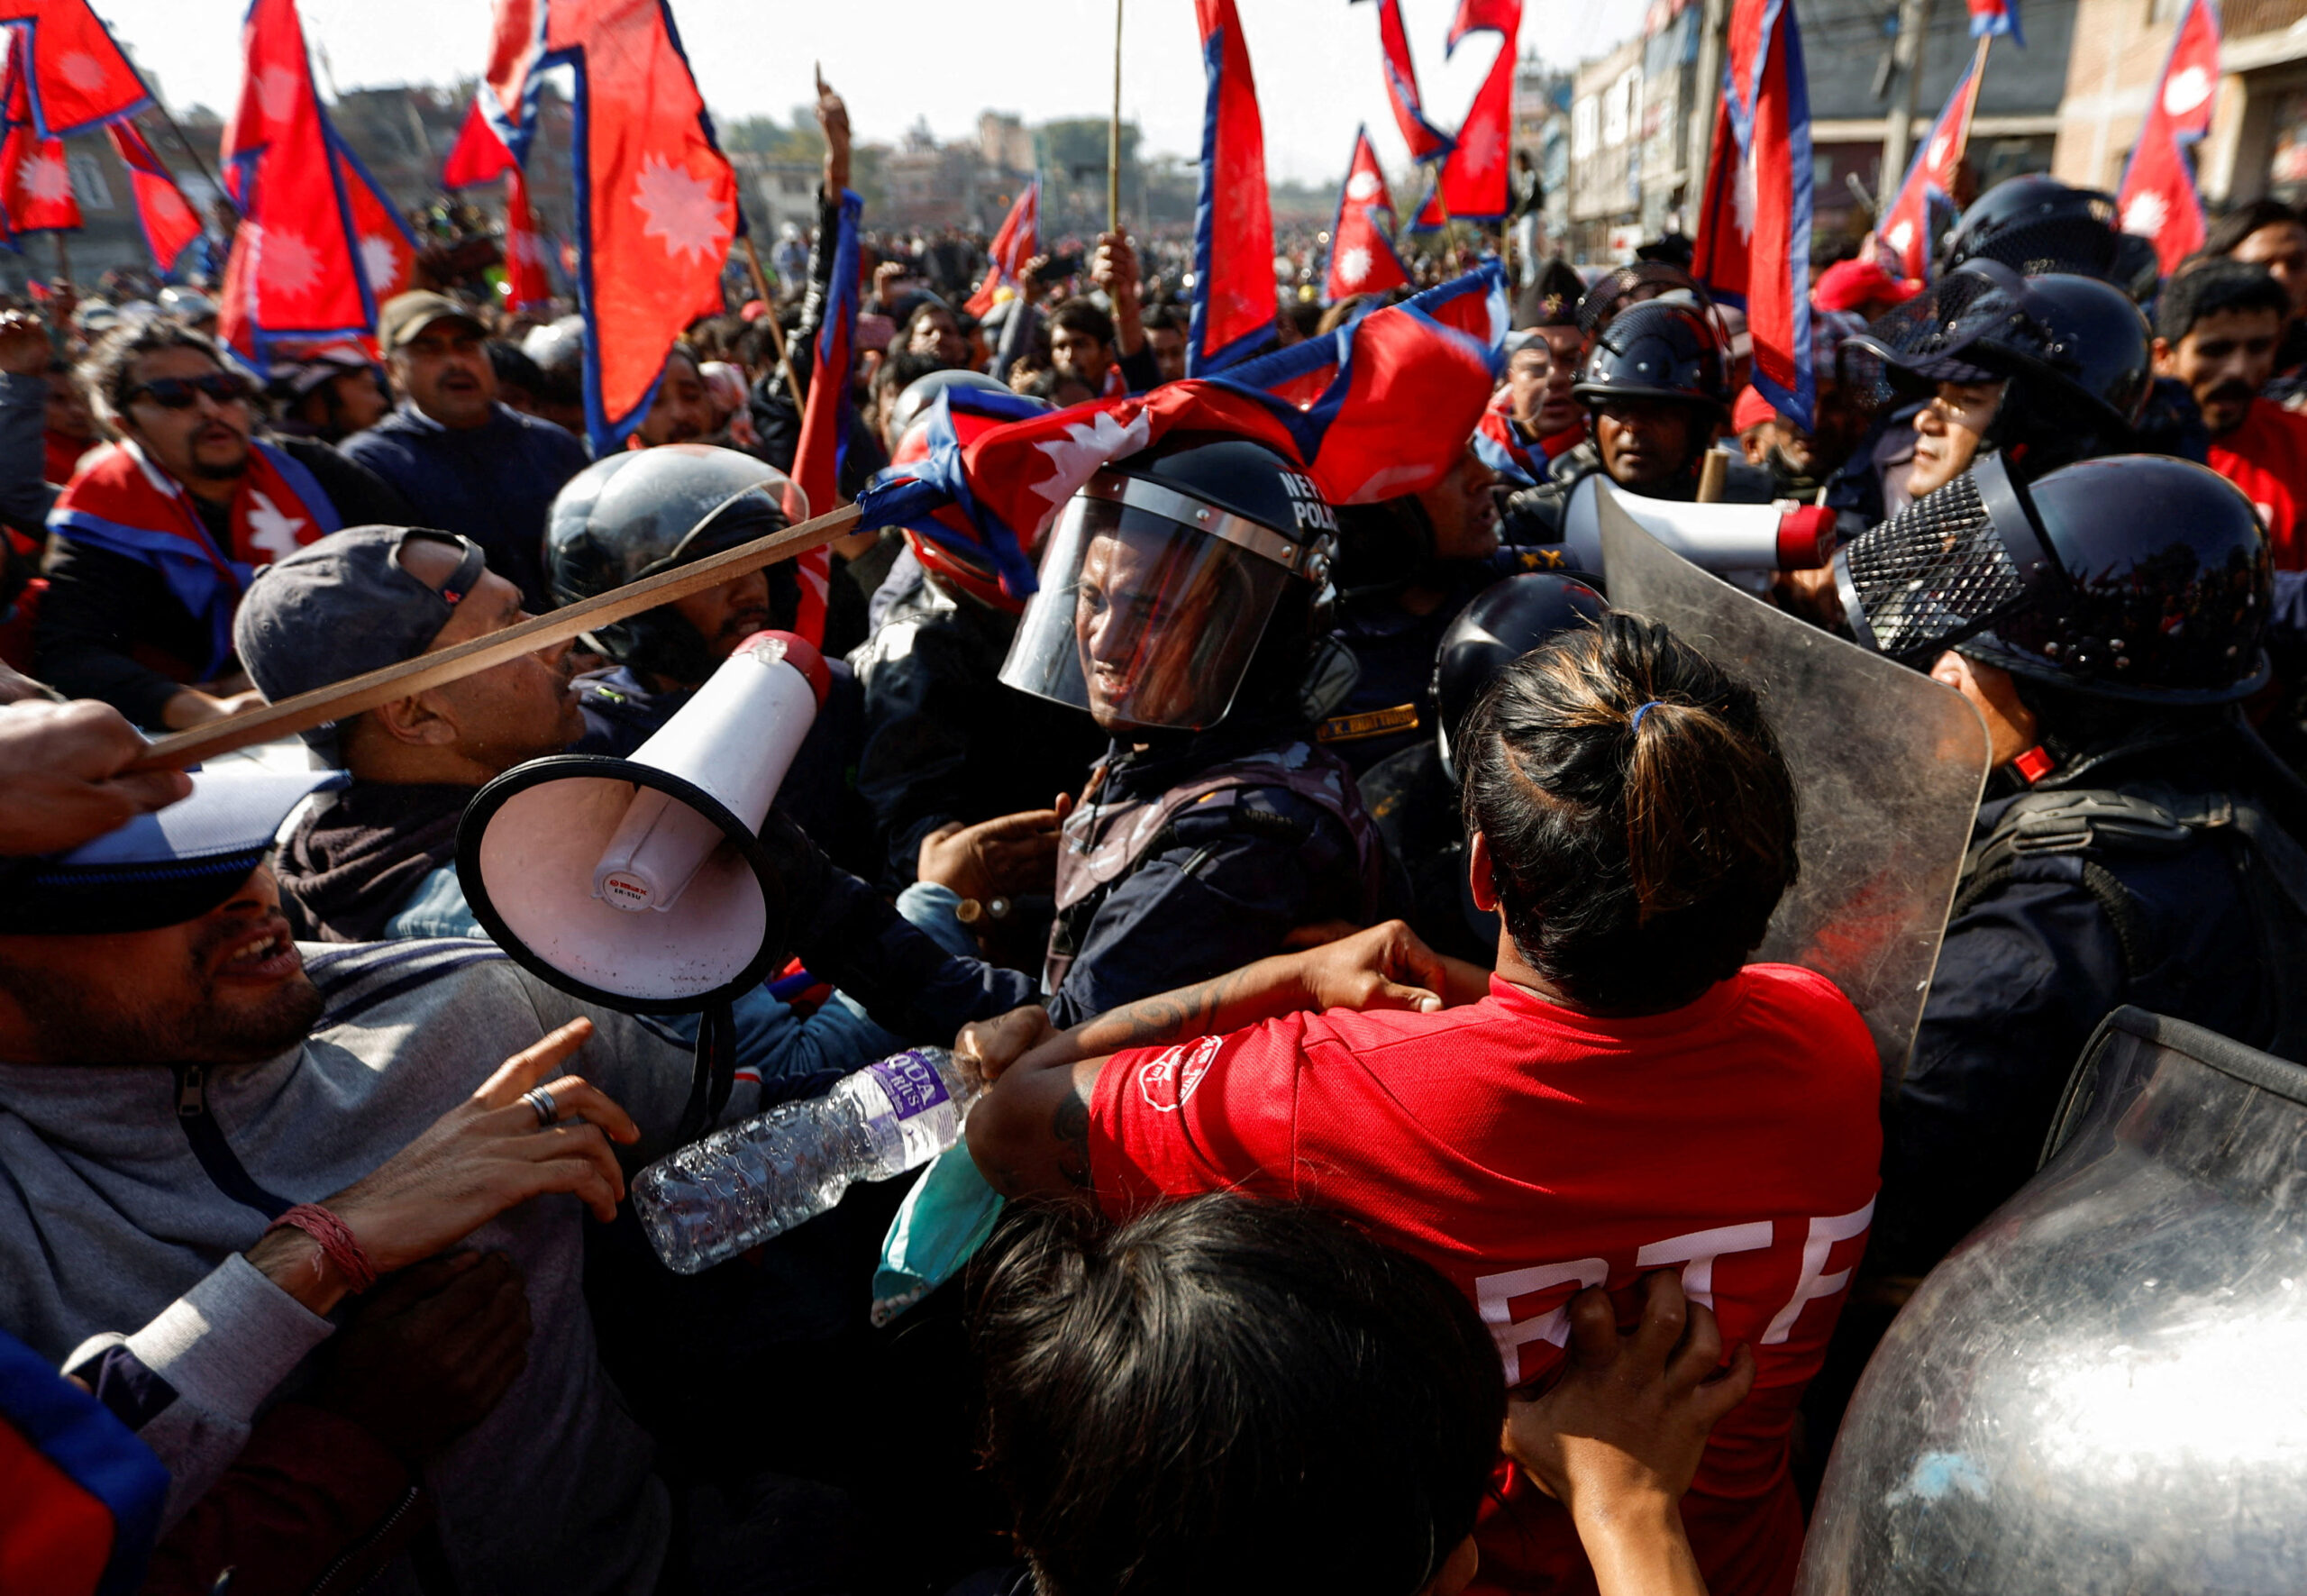 2023 11 23T122105Z 68137028 RC2VI4A592PN RTRMADP 3 NEPAL PROTESTS scaled